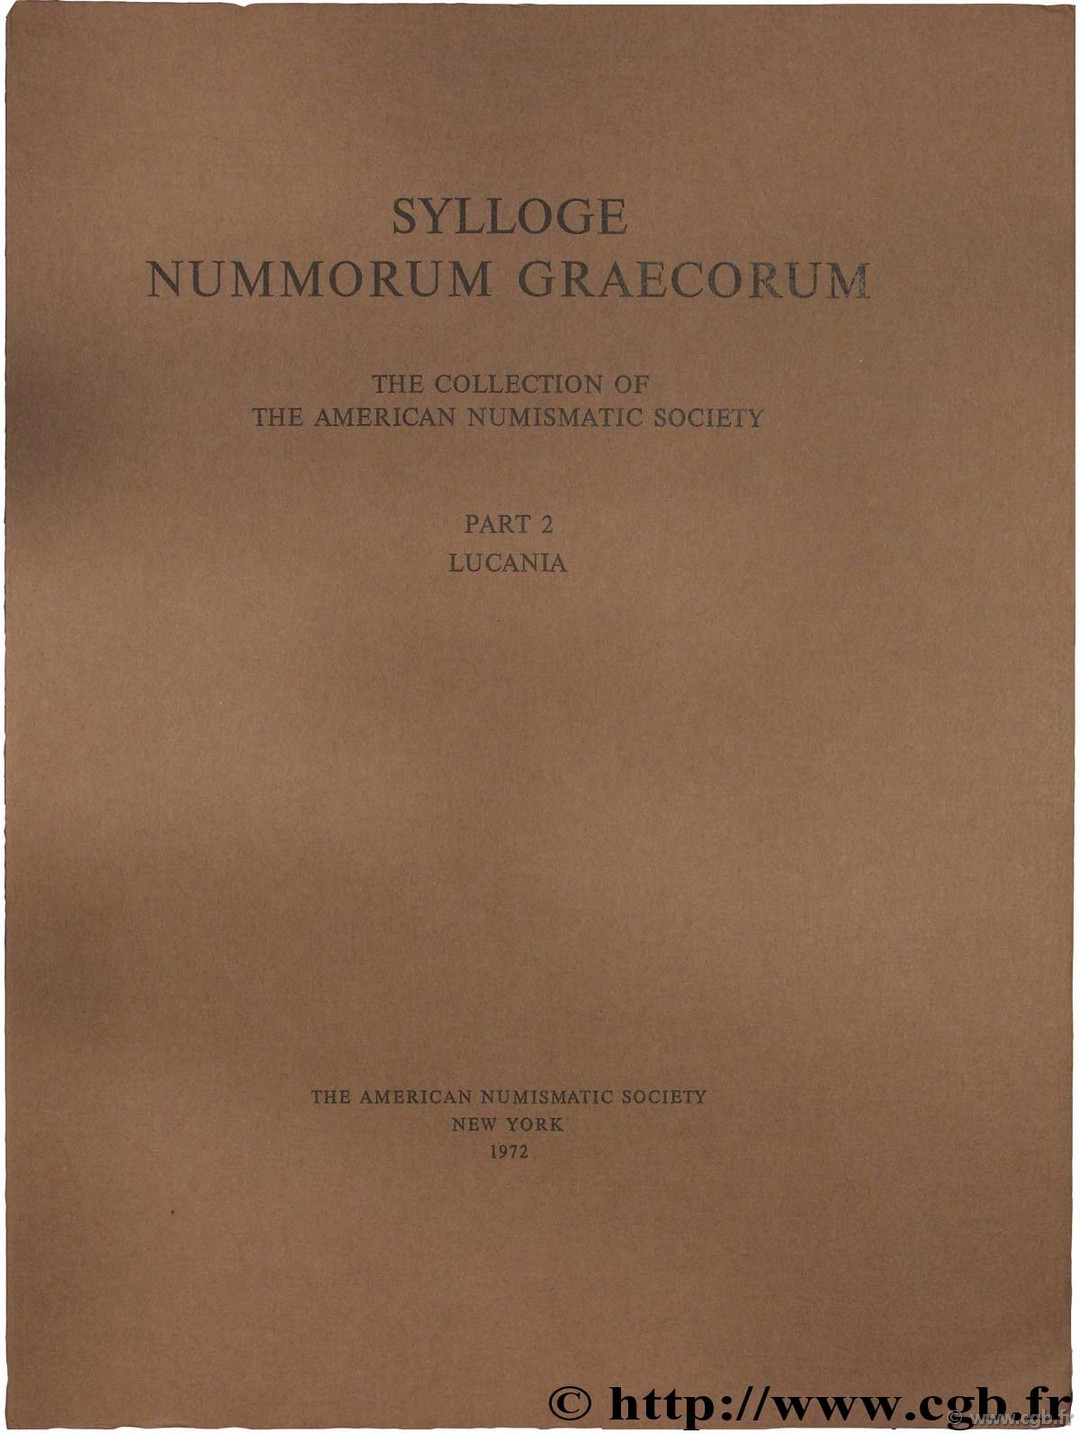 Sylloge Nummorum Graecorum (S.N.G.), The collection of the American Numismatic Society, part II, Lucania 